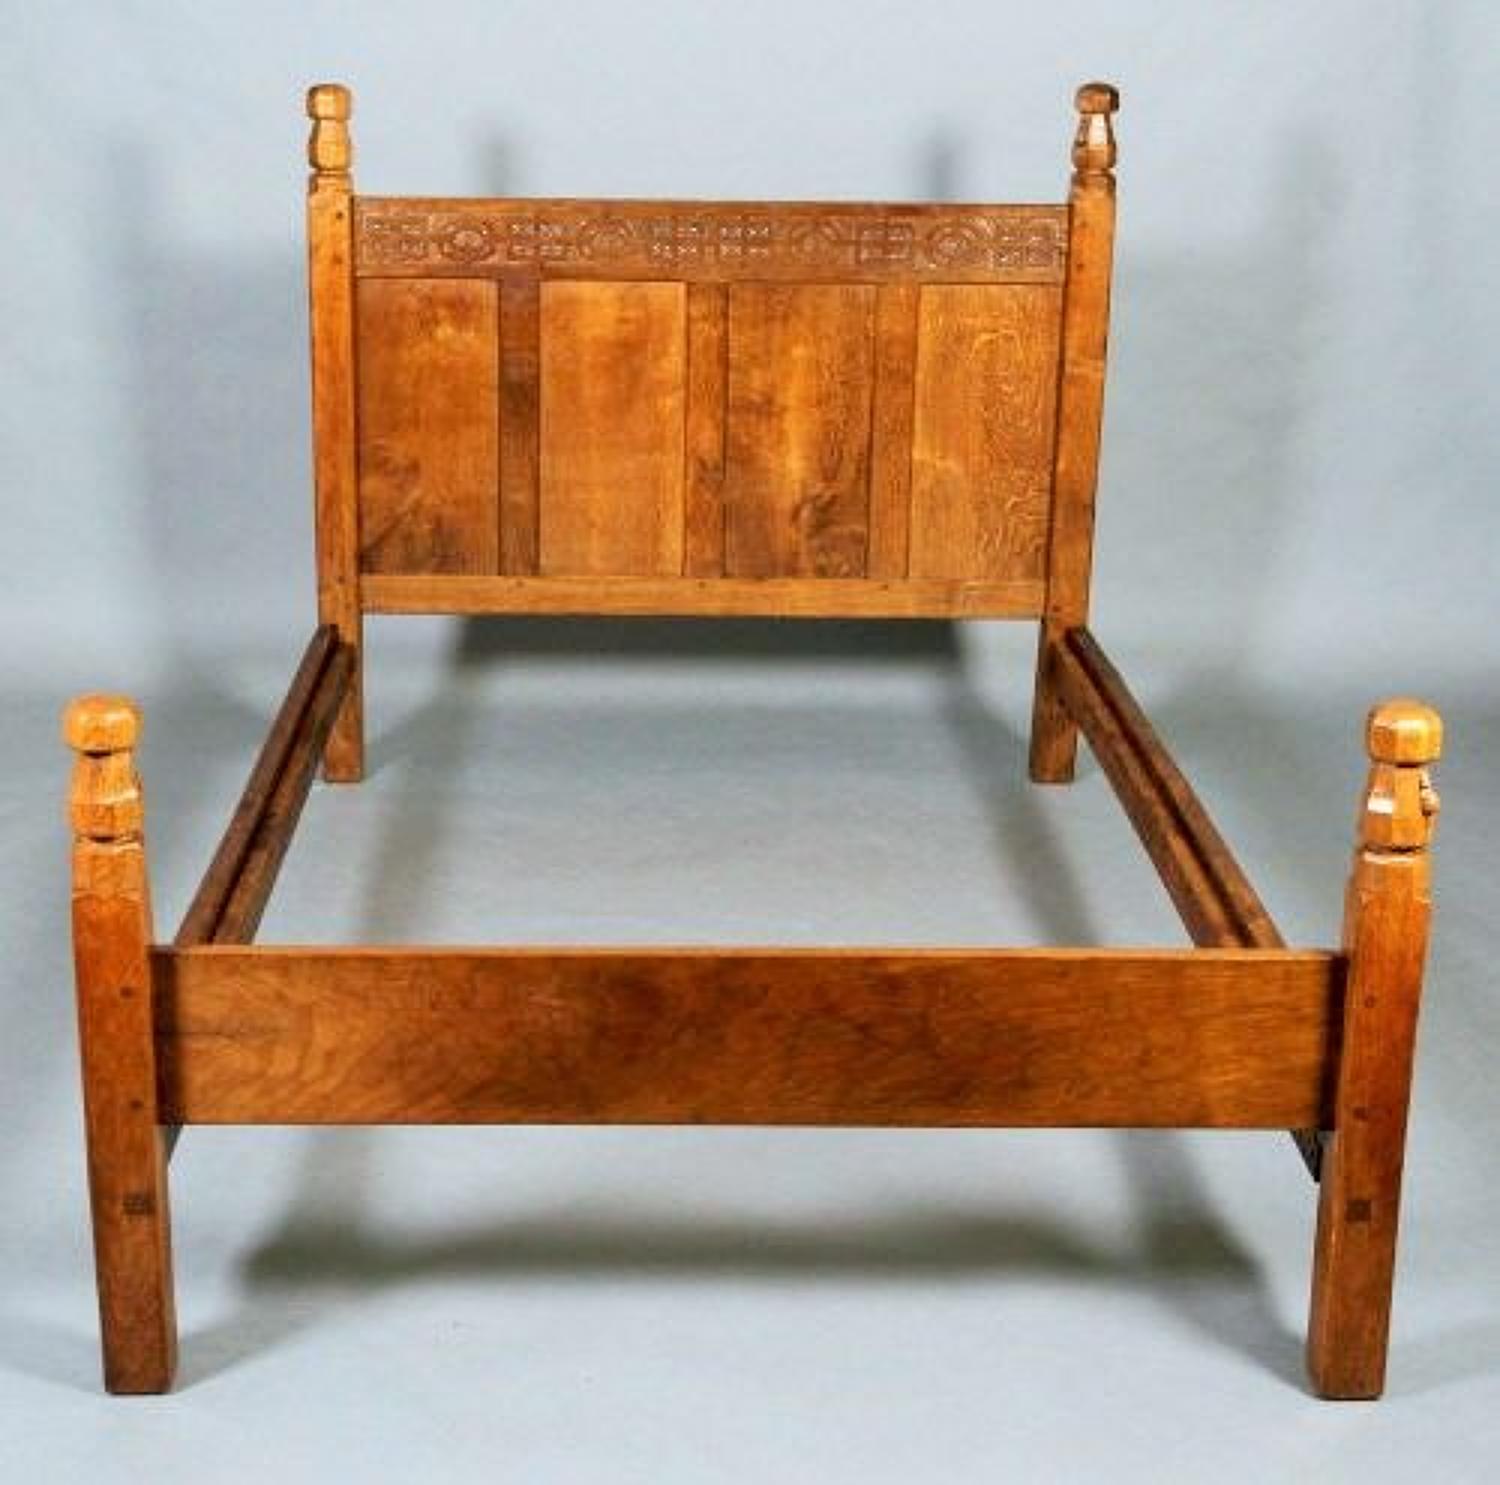 Rare early Mouseman double bed